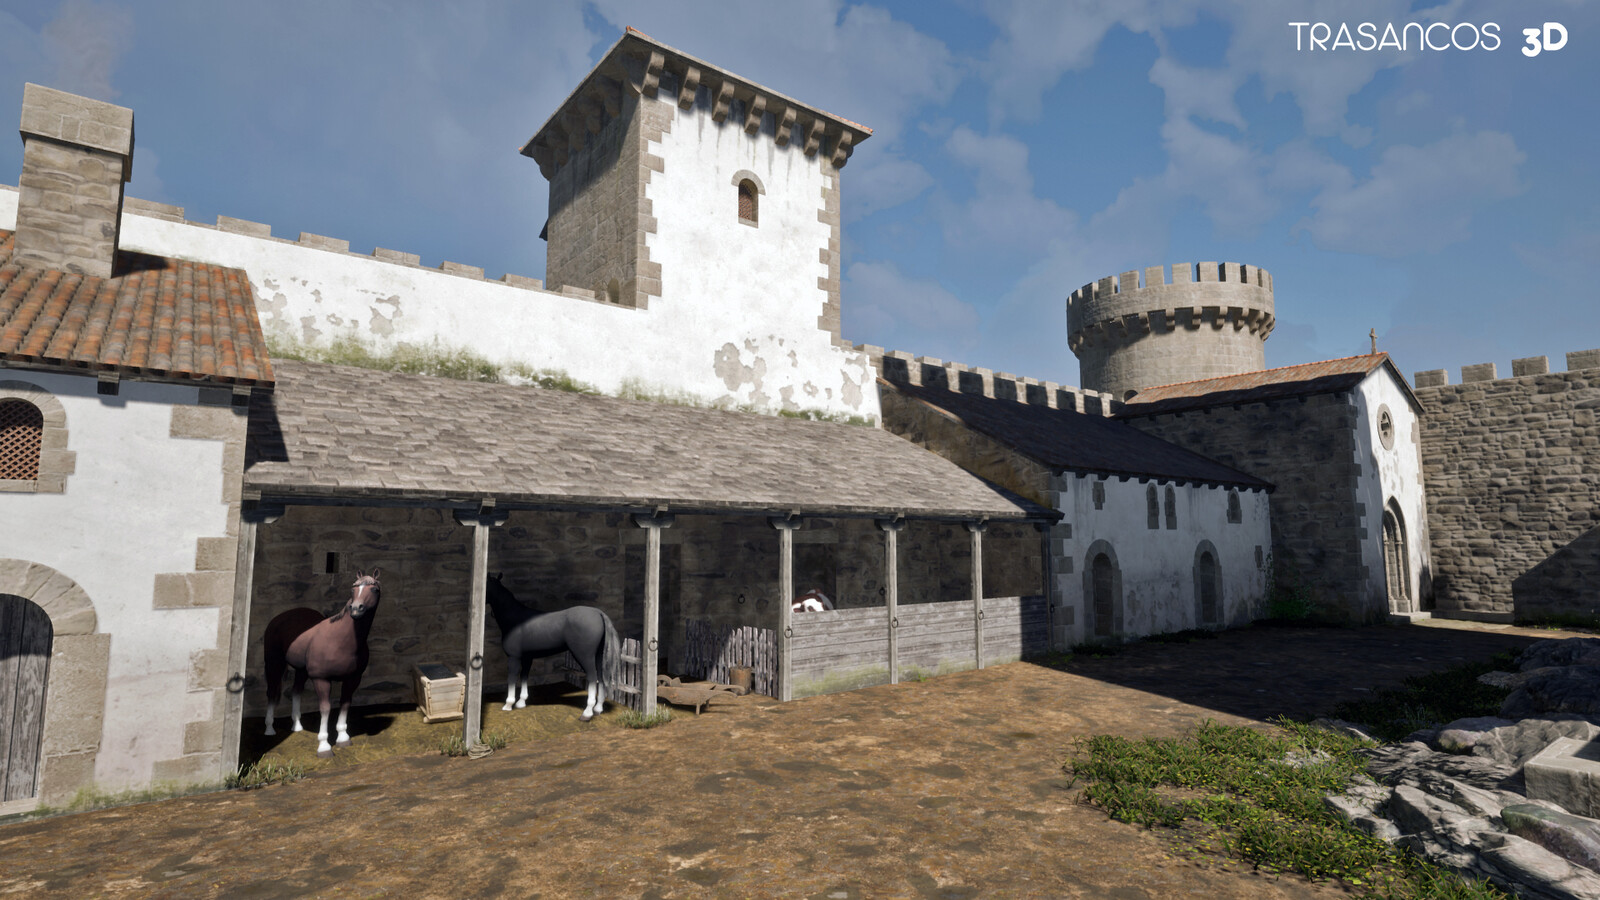 Rocha Forte castle. Final rendering view of stables and interior outbuildings